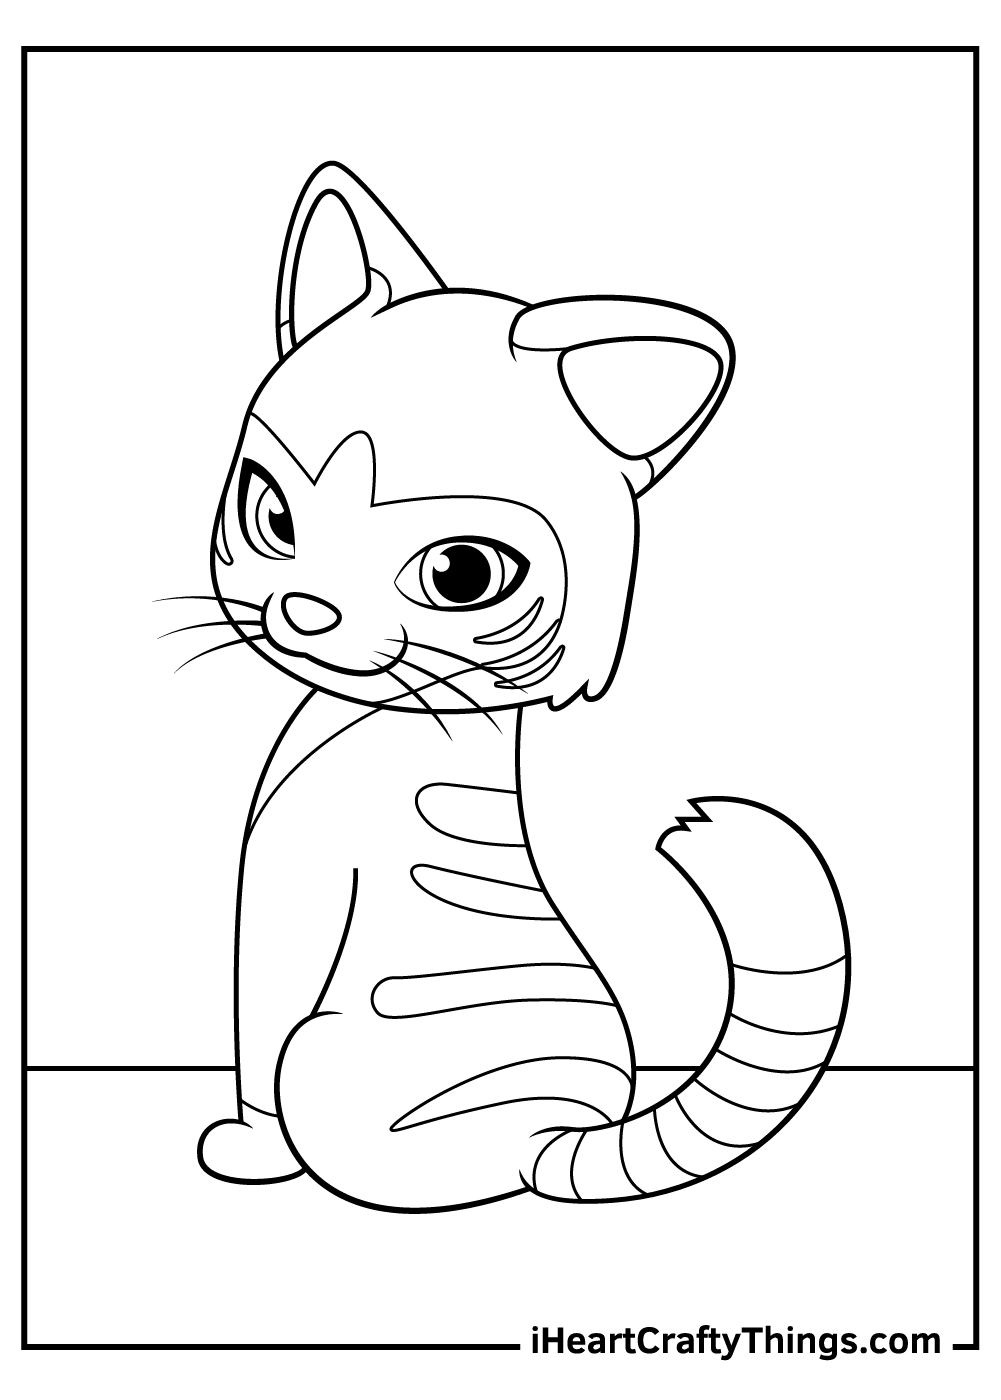 LEGO Friends Coloring Pages Updated 20